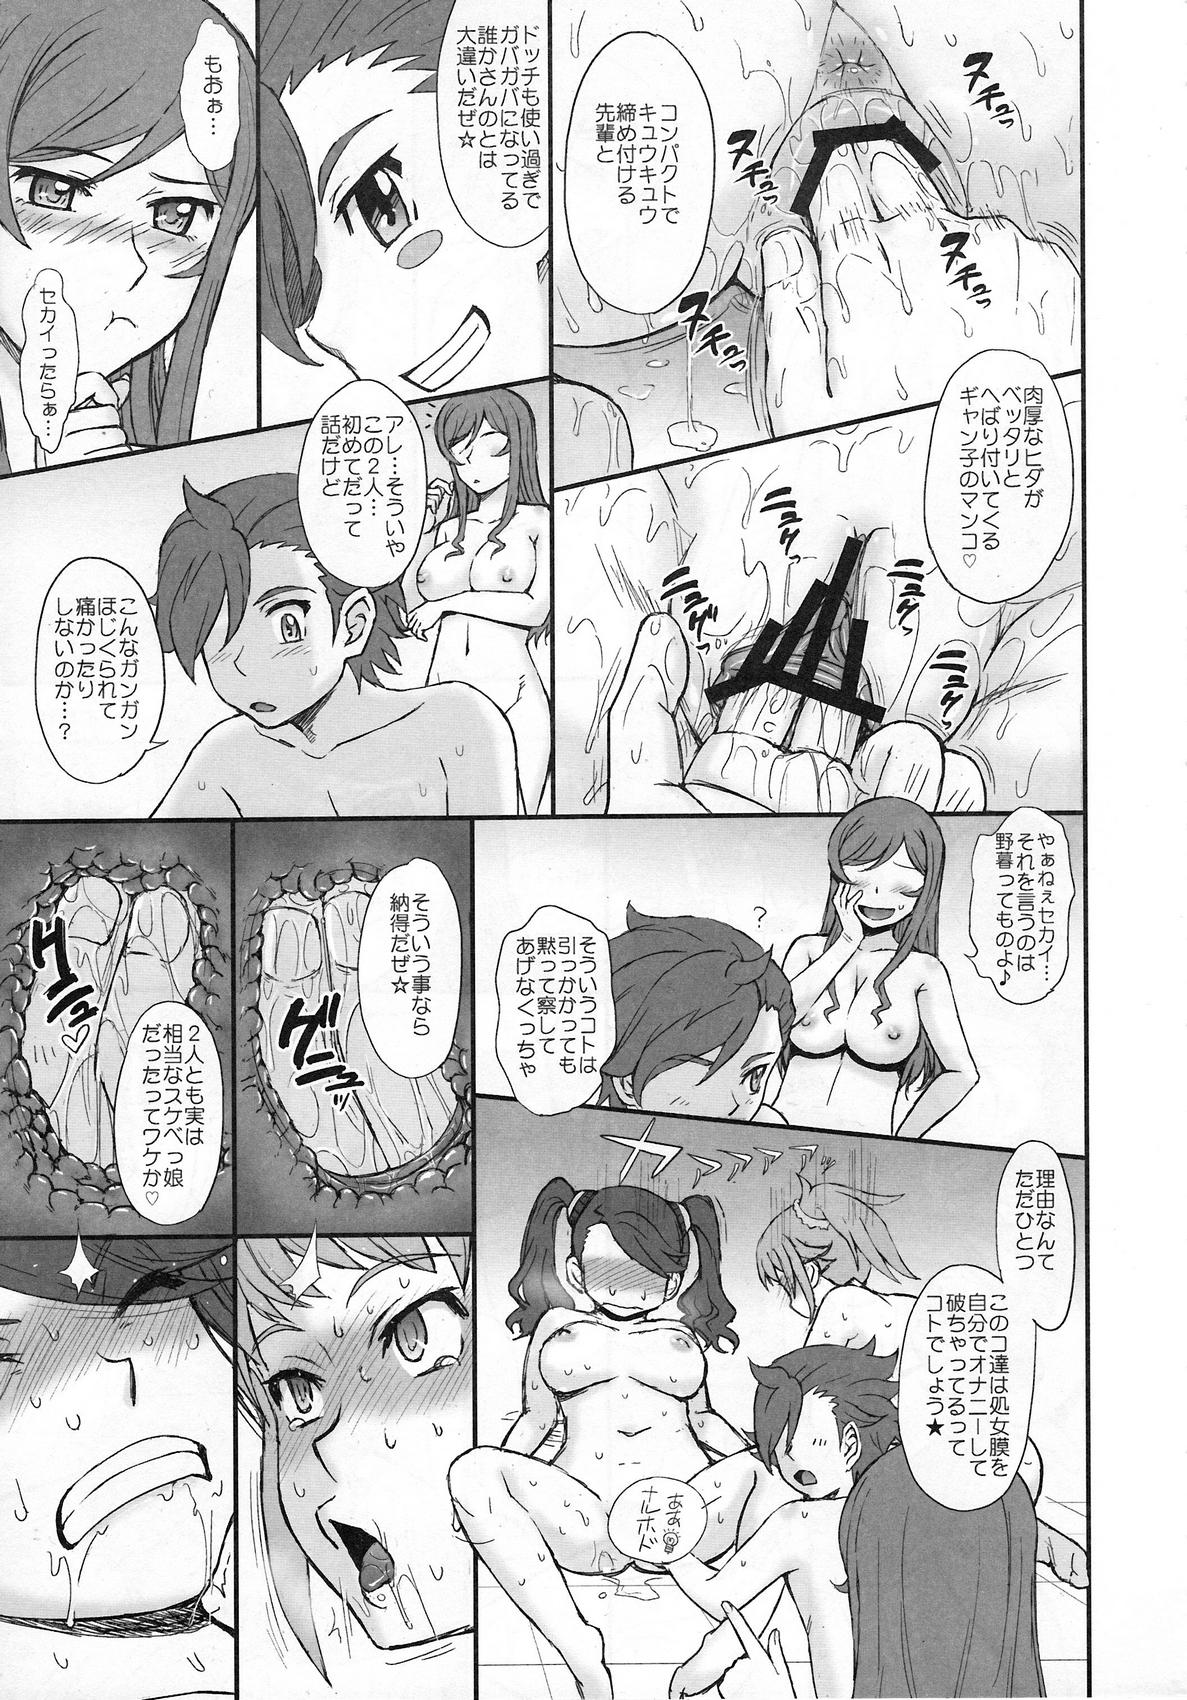 Chichona Try Try Try!! - Gundam build fighters try Yoga - Page 12